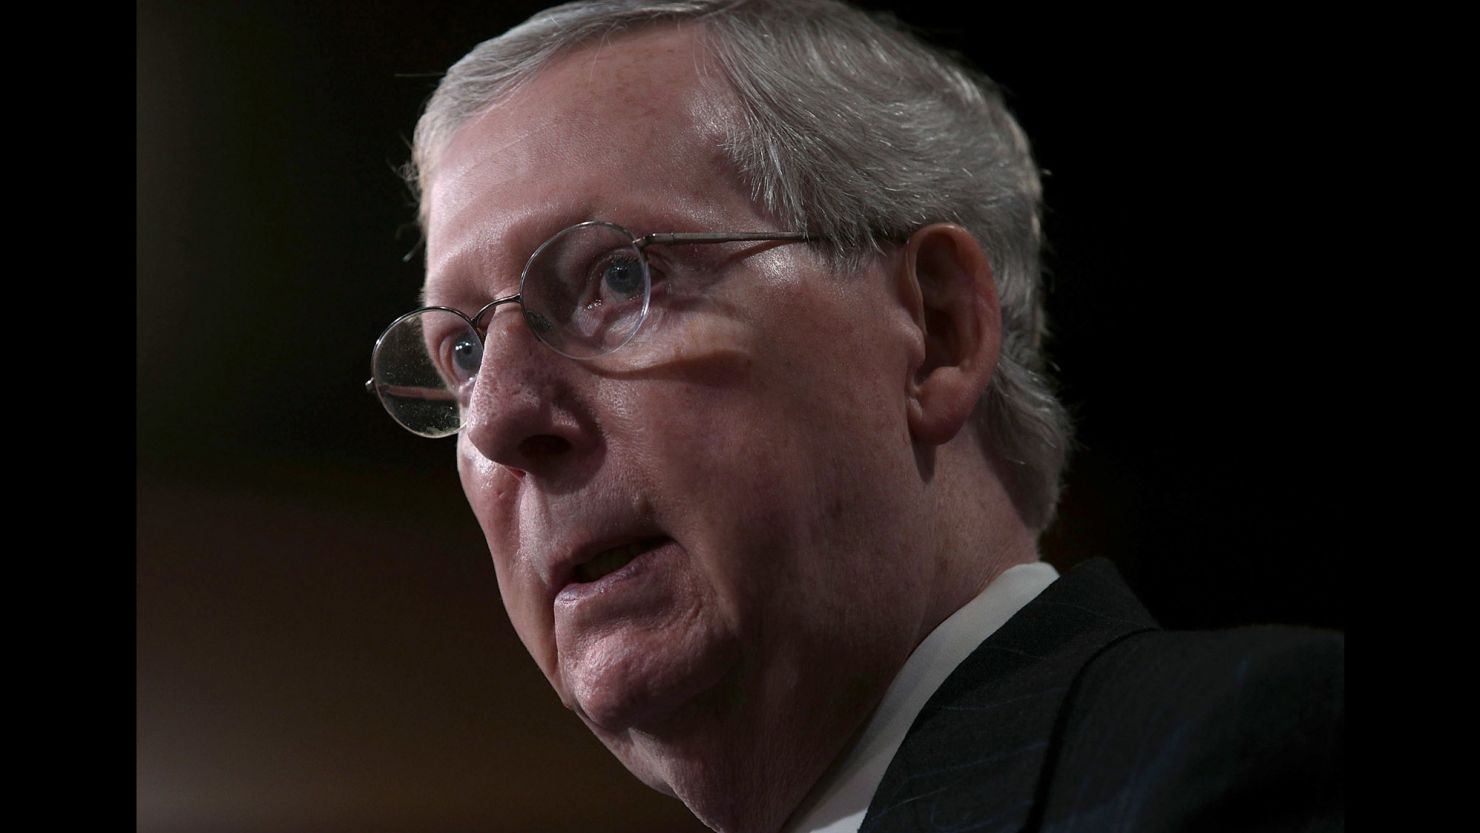 Senate Majority Leader Sen. Mitch McConnell speaks during a news conference in April at the Capitol. (Photo by Alex Wong/Getty Images)